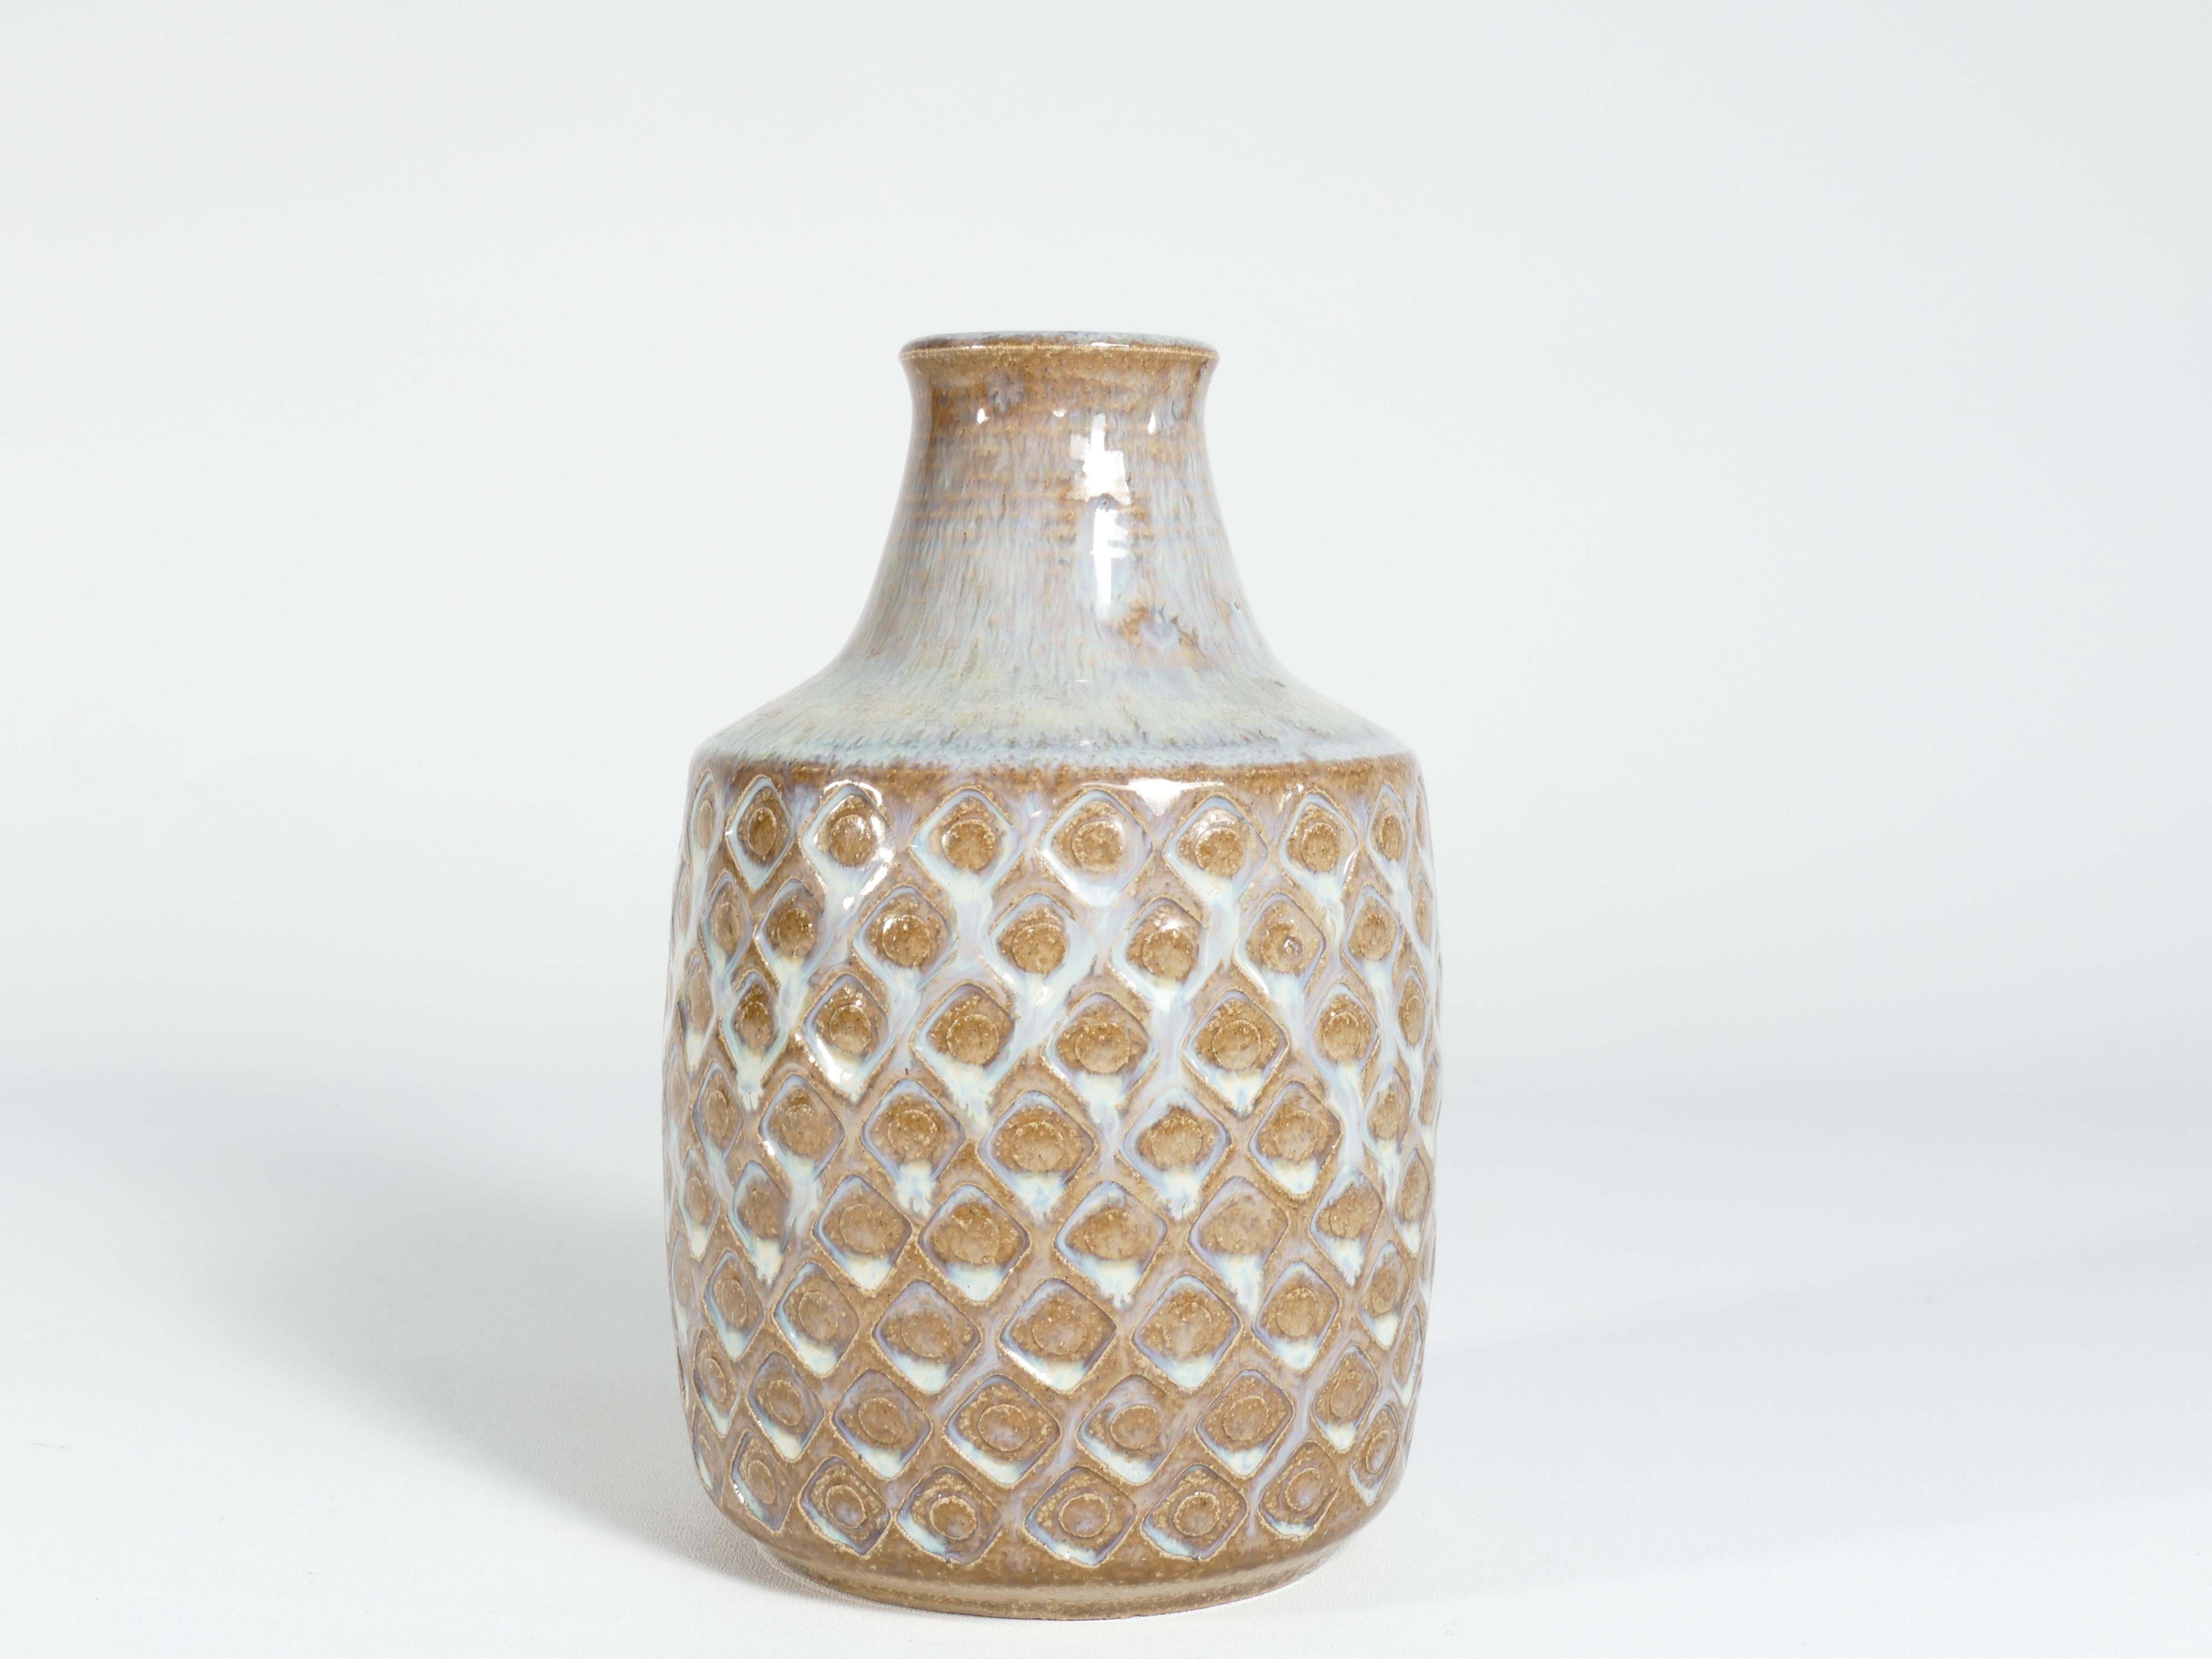 Handcrafted in the mid-20th century, this exquisite stoneware vase bear the distinctive mark of Søholm Stentøj. Produced by the renowned Danish company Soholm Stentoj on the picturesque island of Bornholm, this vase capture the essence of the era's